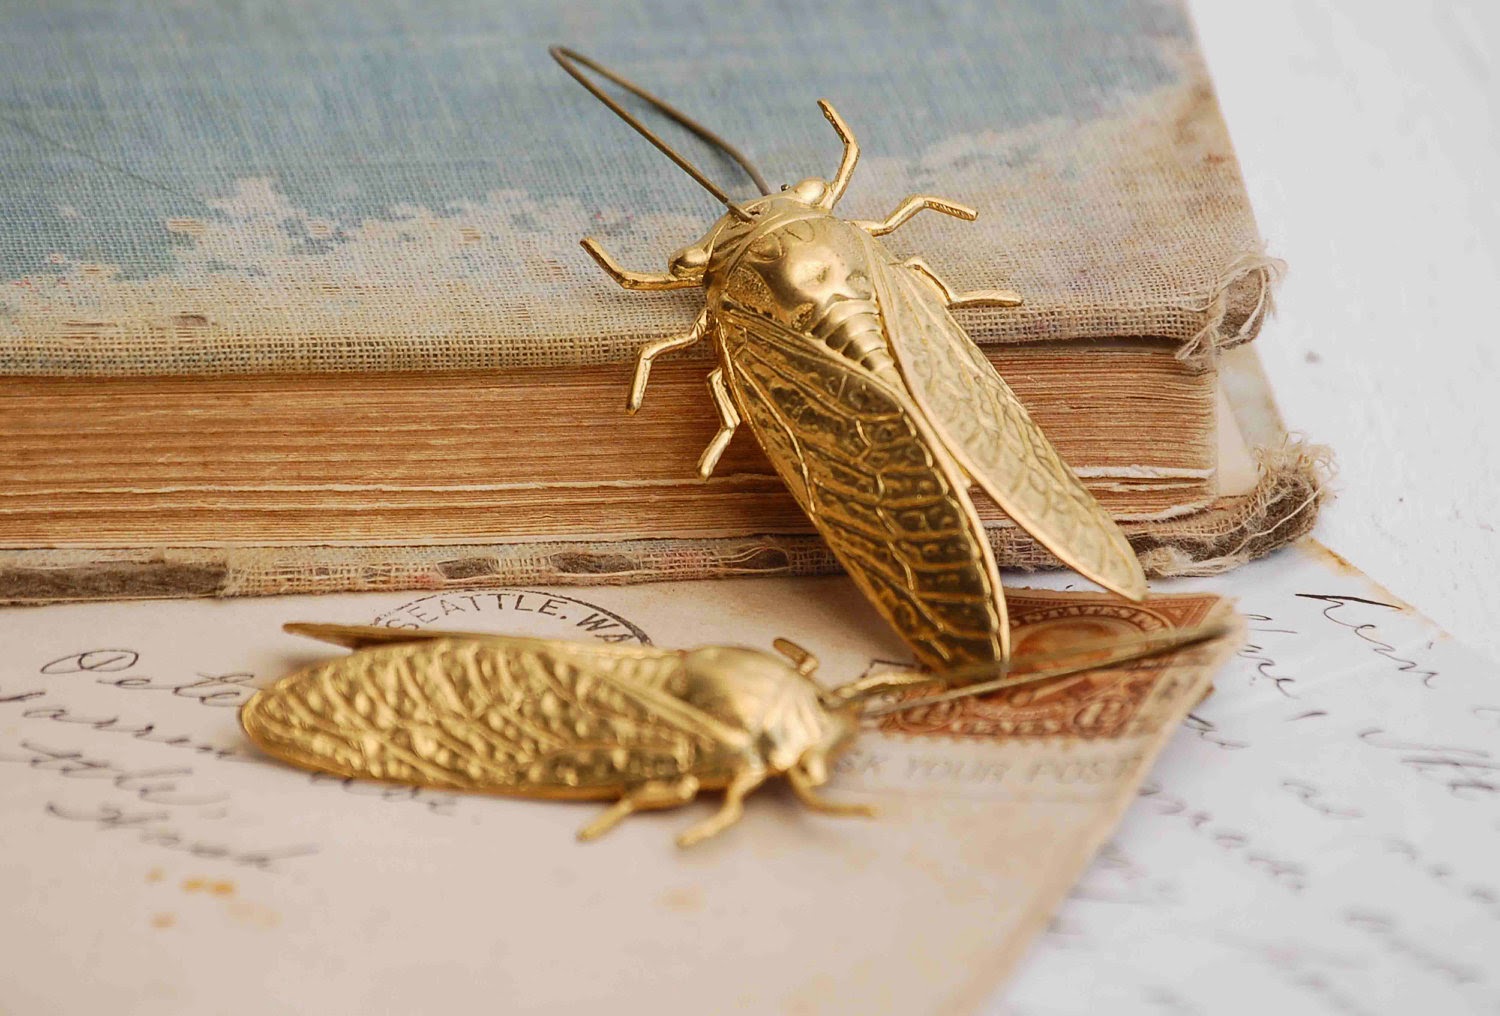 https://www.etsy.com/listing/109846198/big-gold-beetle-earrings-nature-study?ref=shop_home_active_6&ga_search_query=beetle